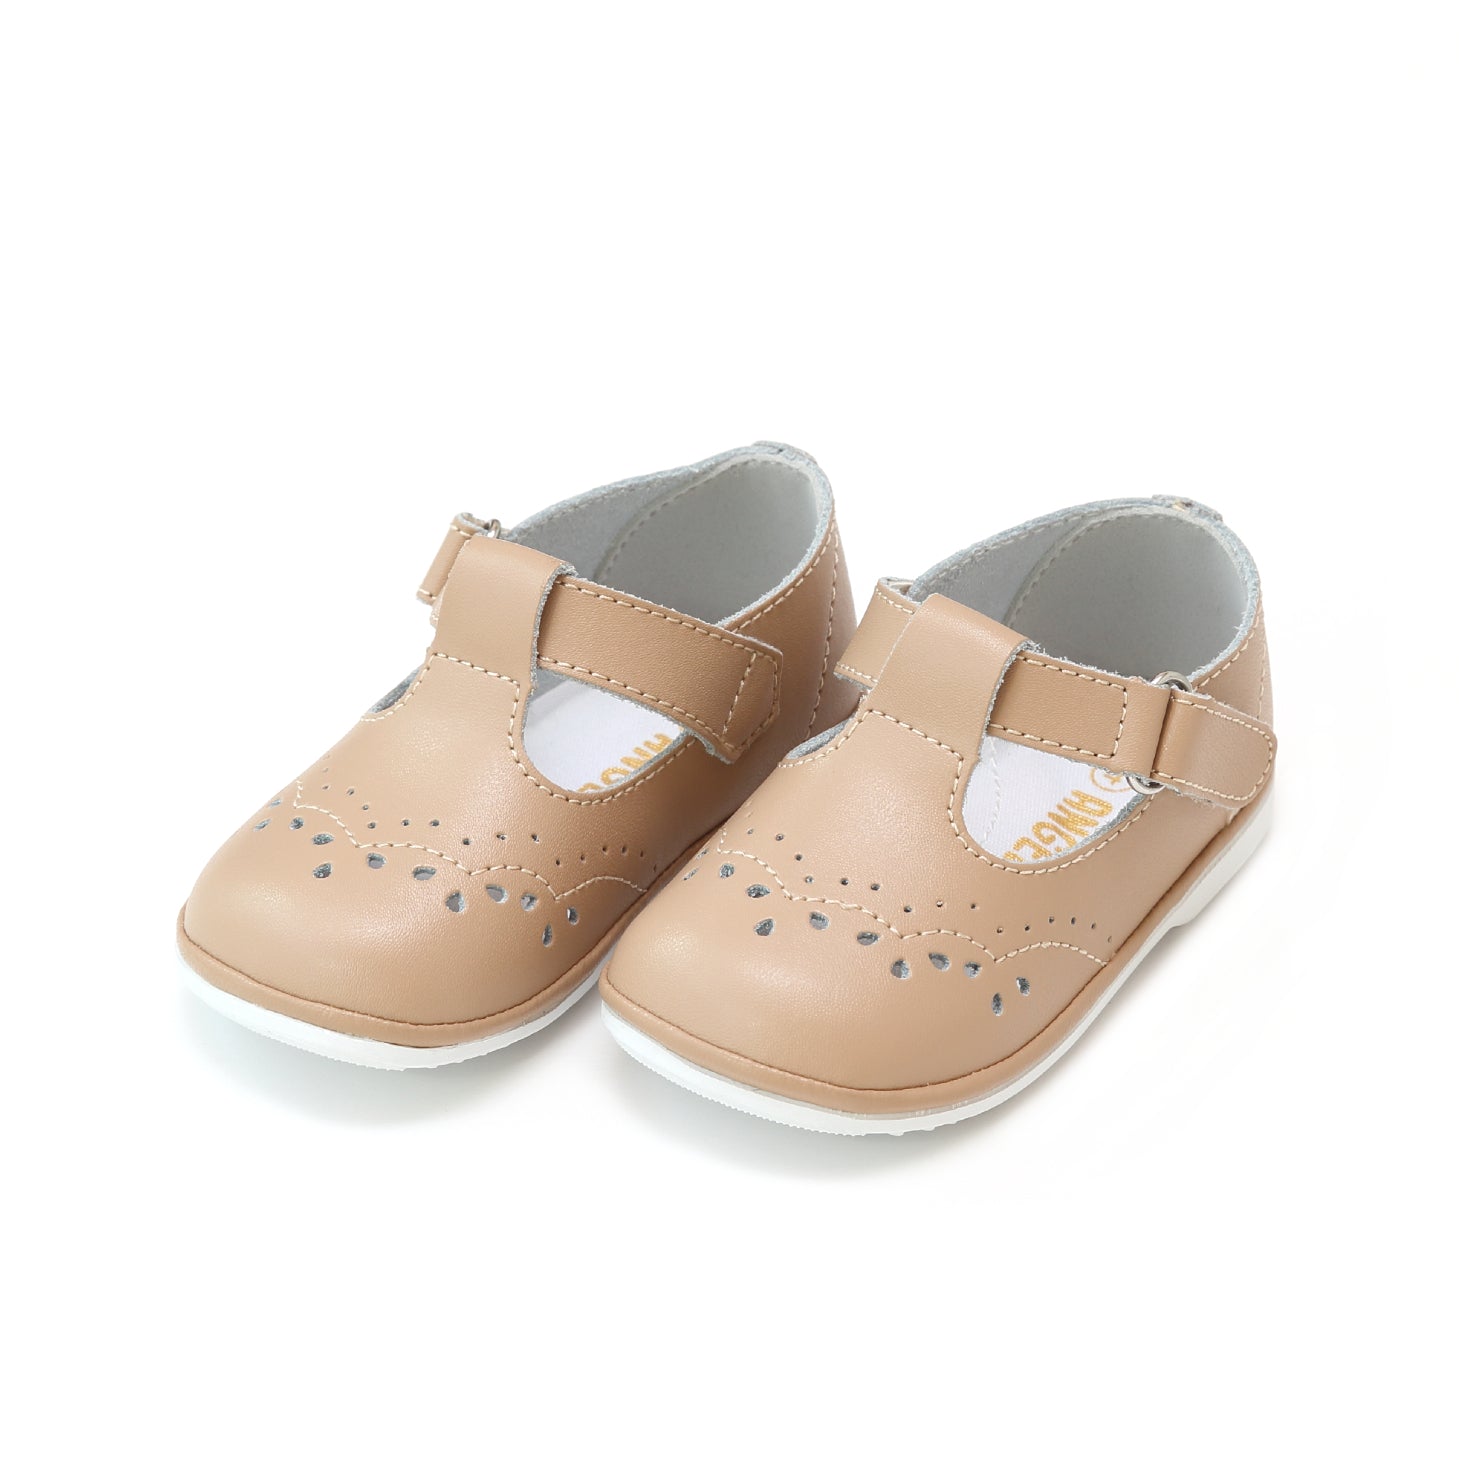 angel baby shoes wholesale